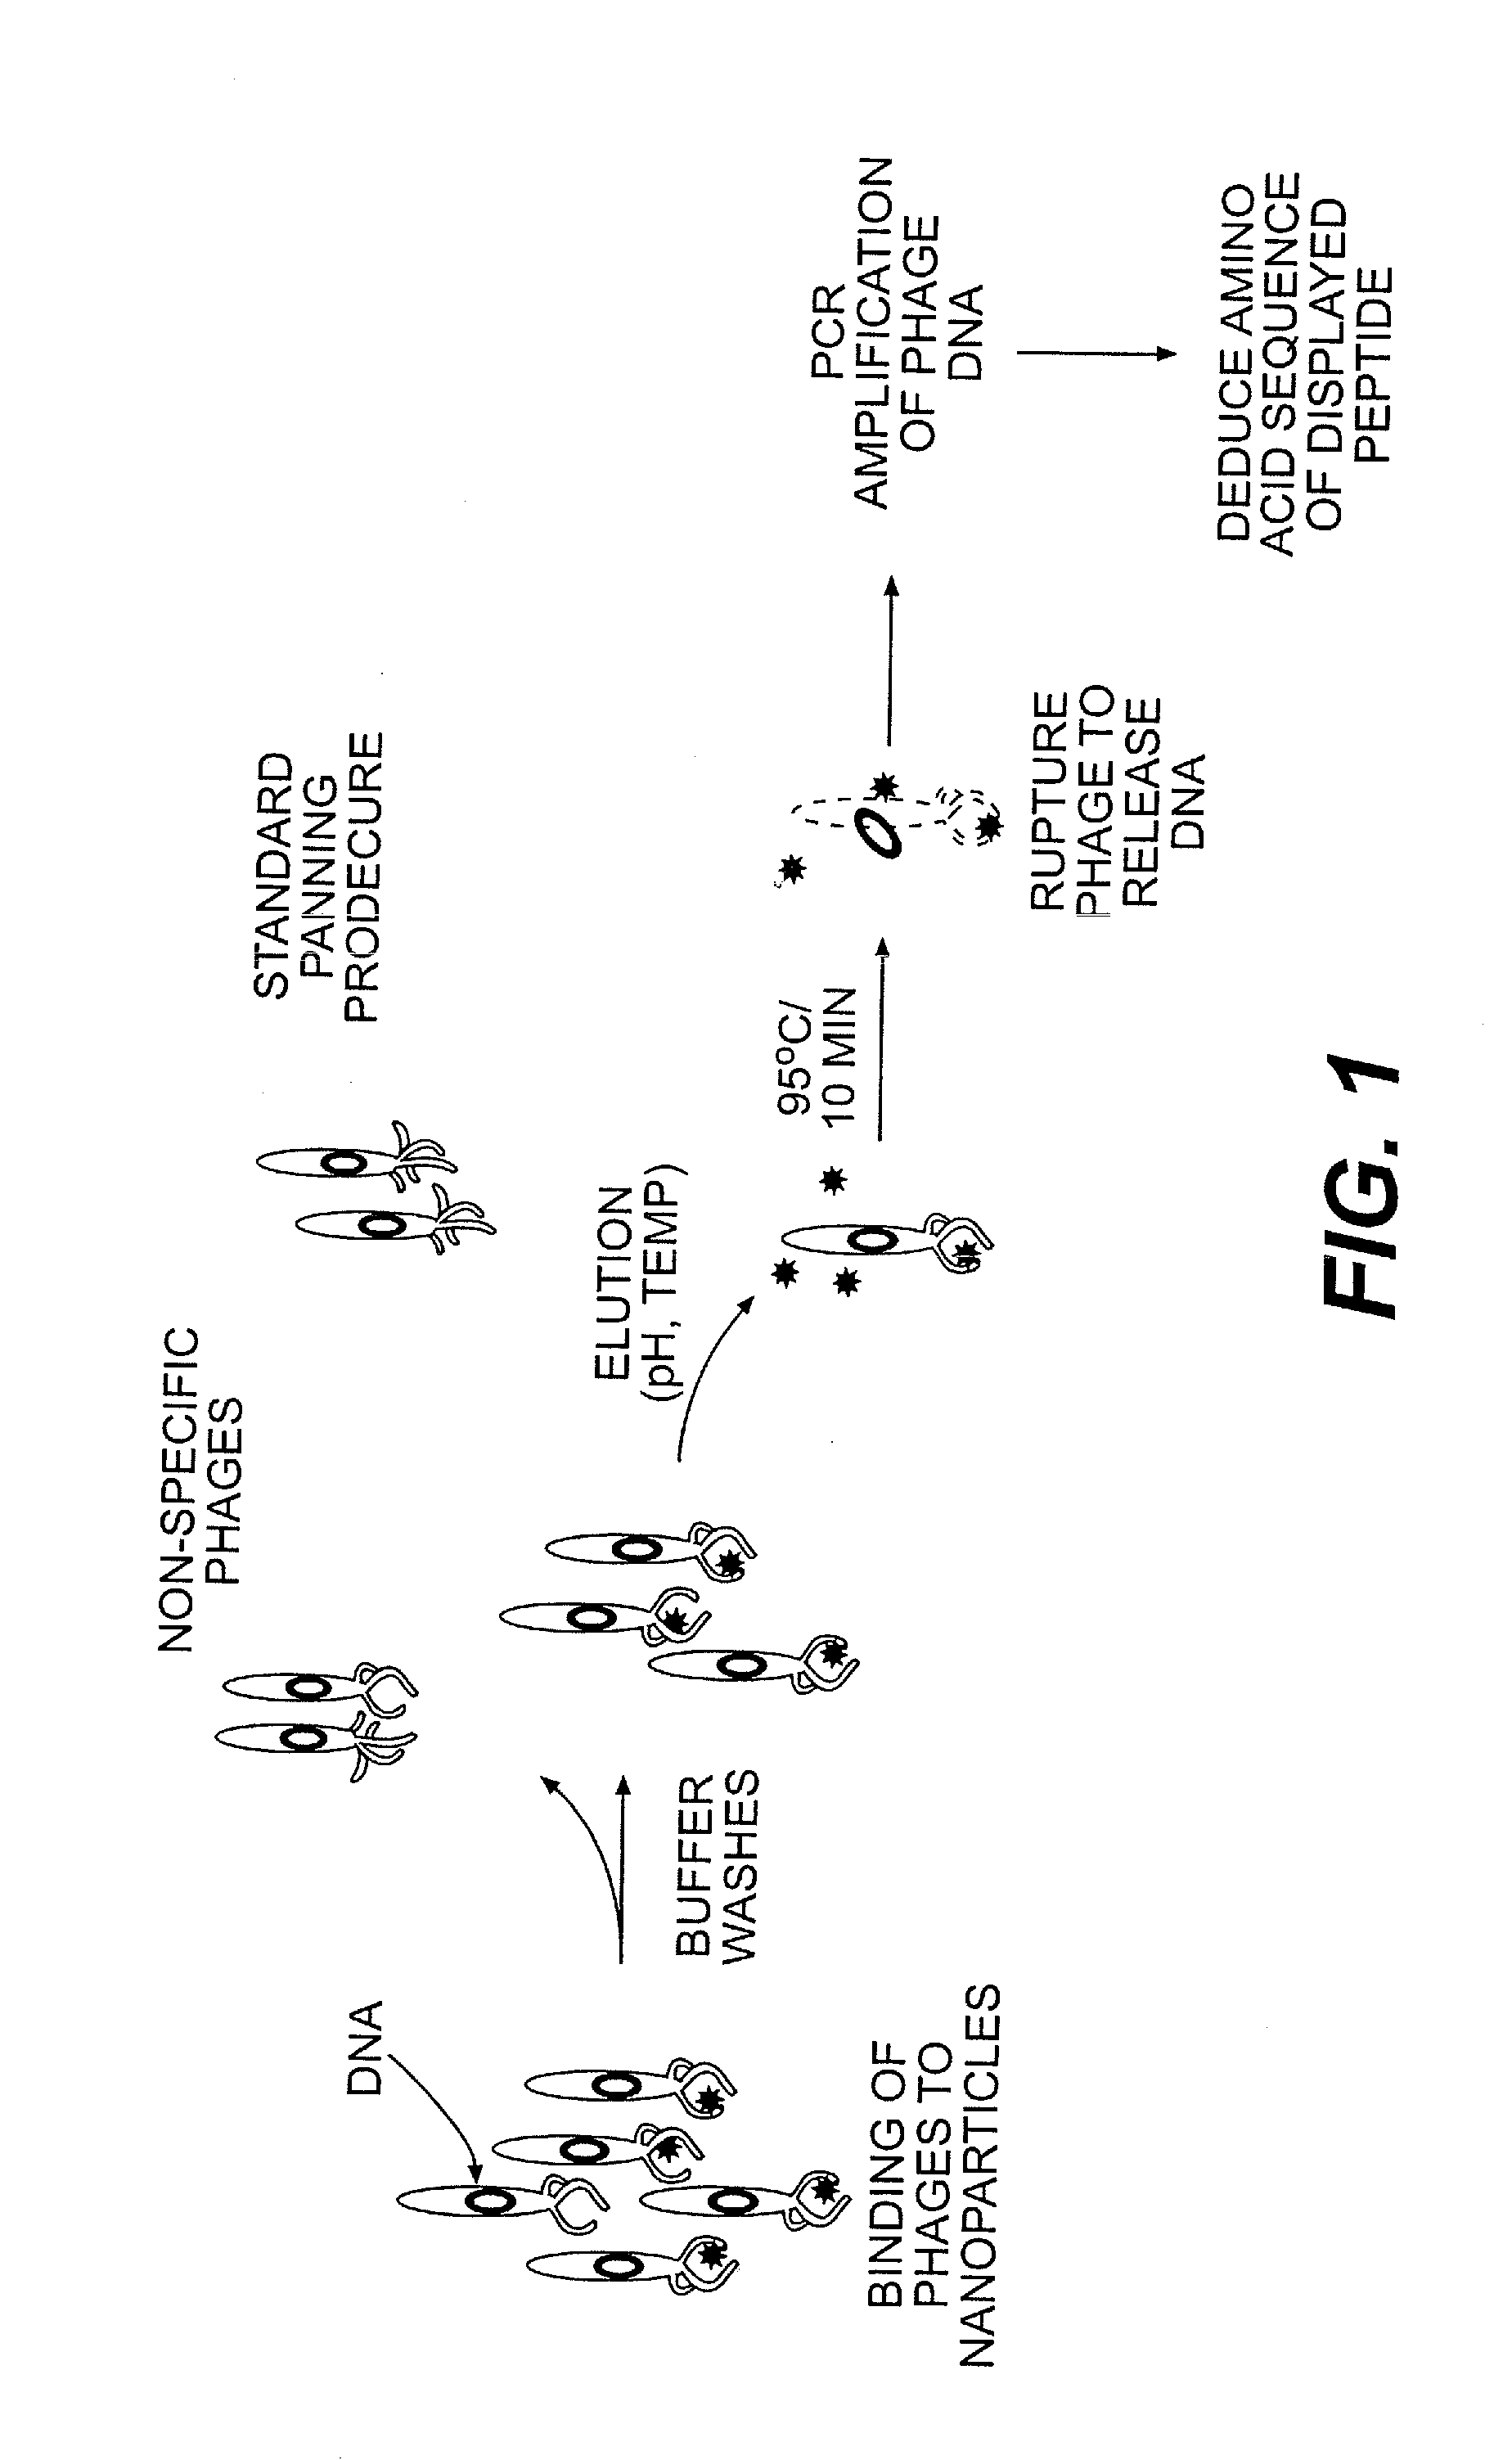 Peptide templates for nanoparticle synthesis obtained through pcr-driven phage display method